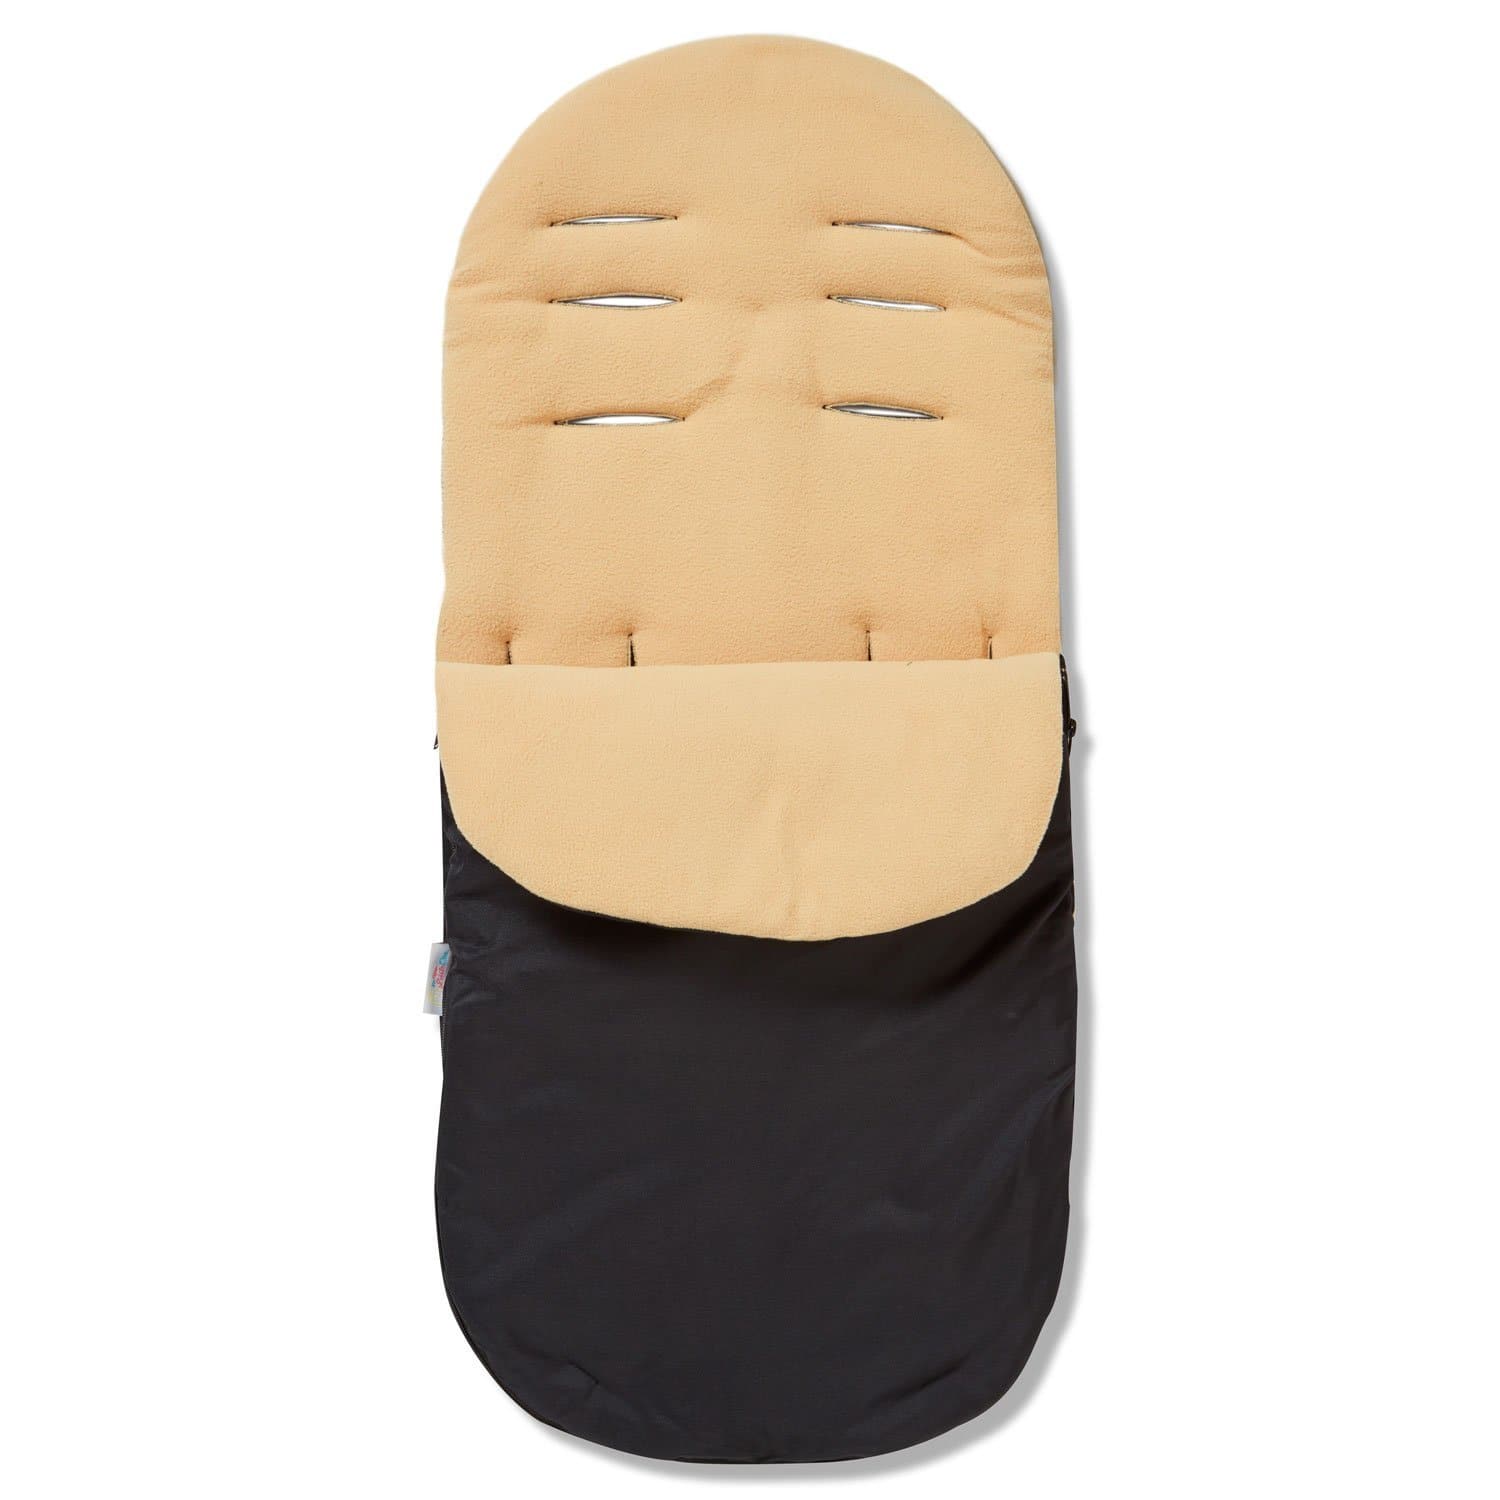 Footmuff / Cosy Toes Compatible with Joie - Sand / Fits All Models | For Your Little One